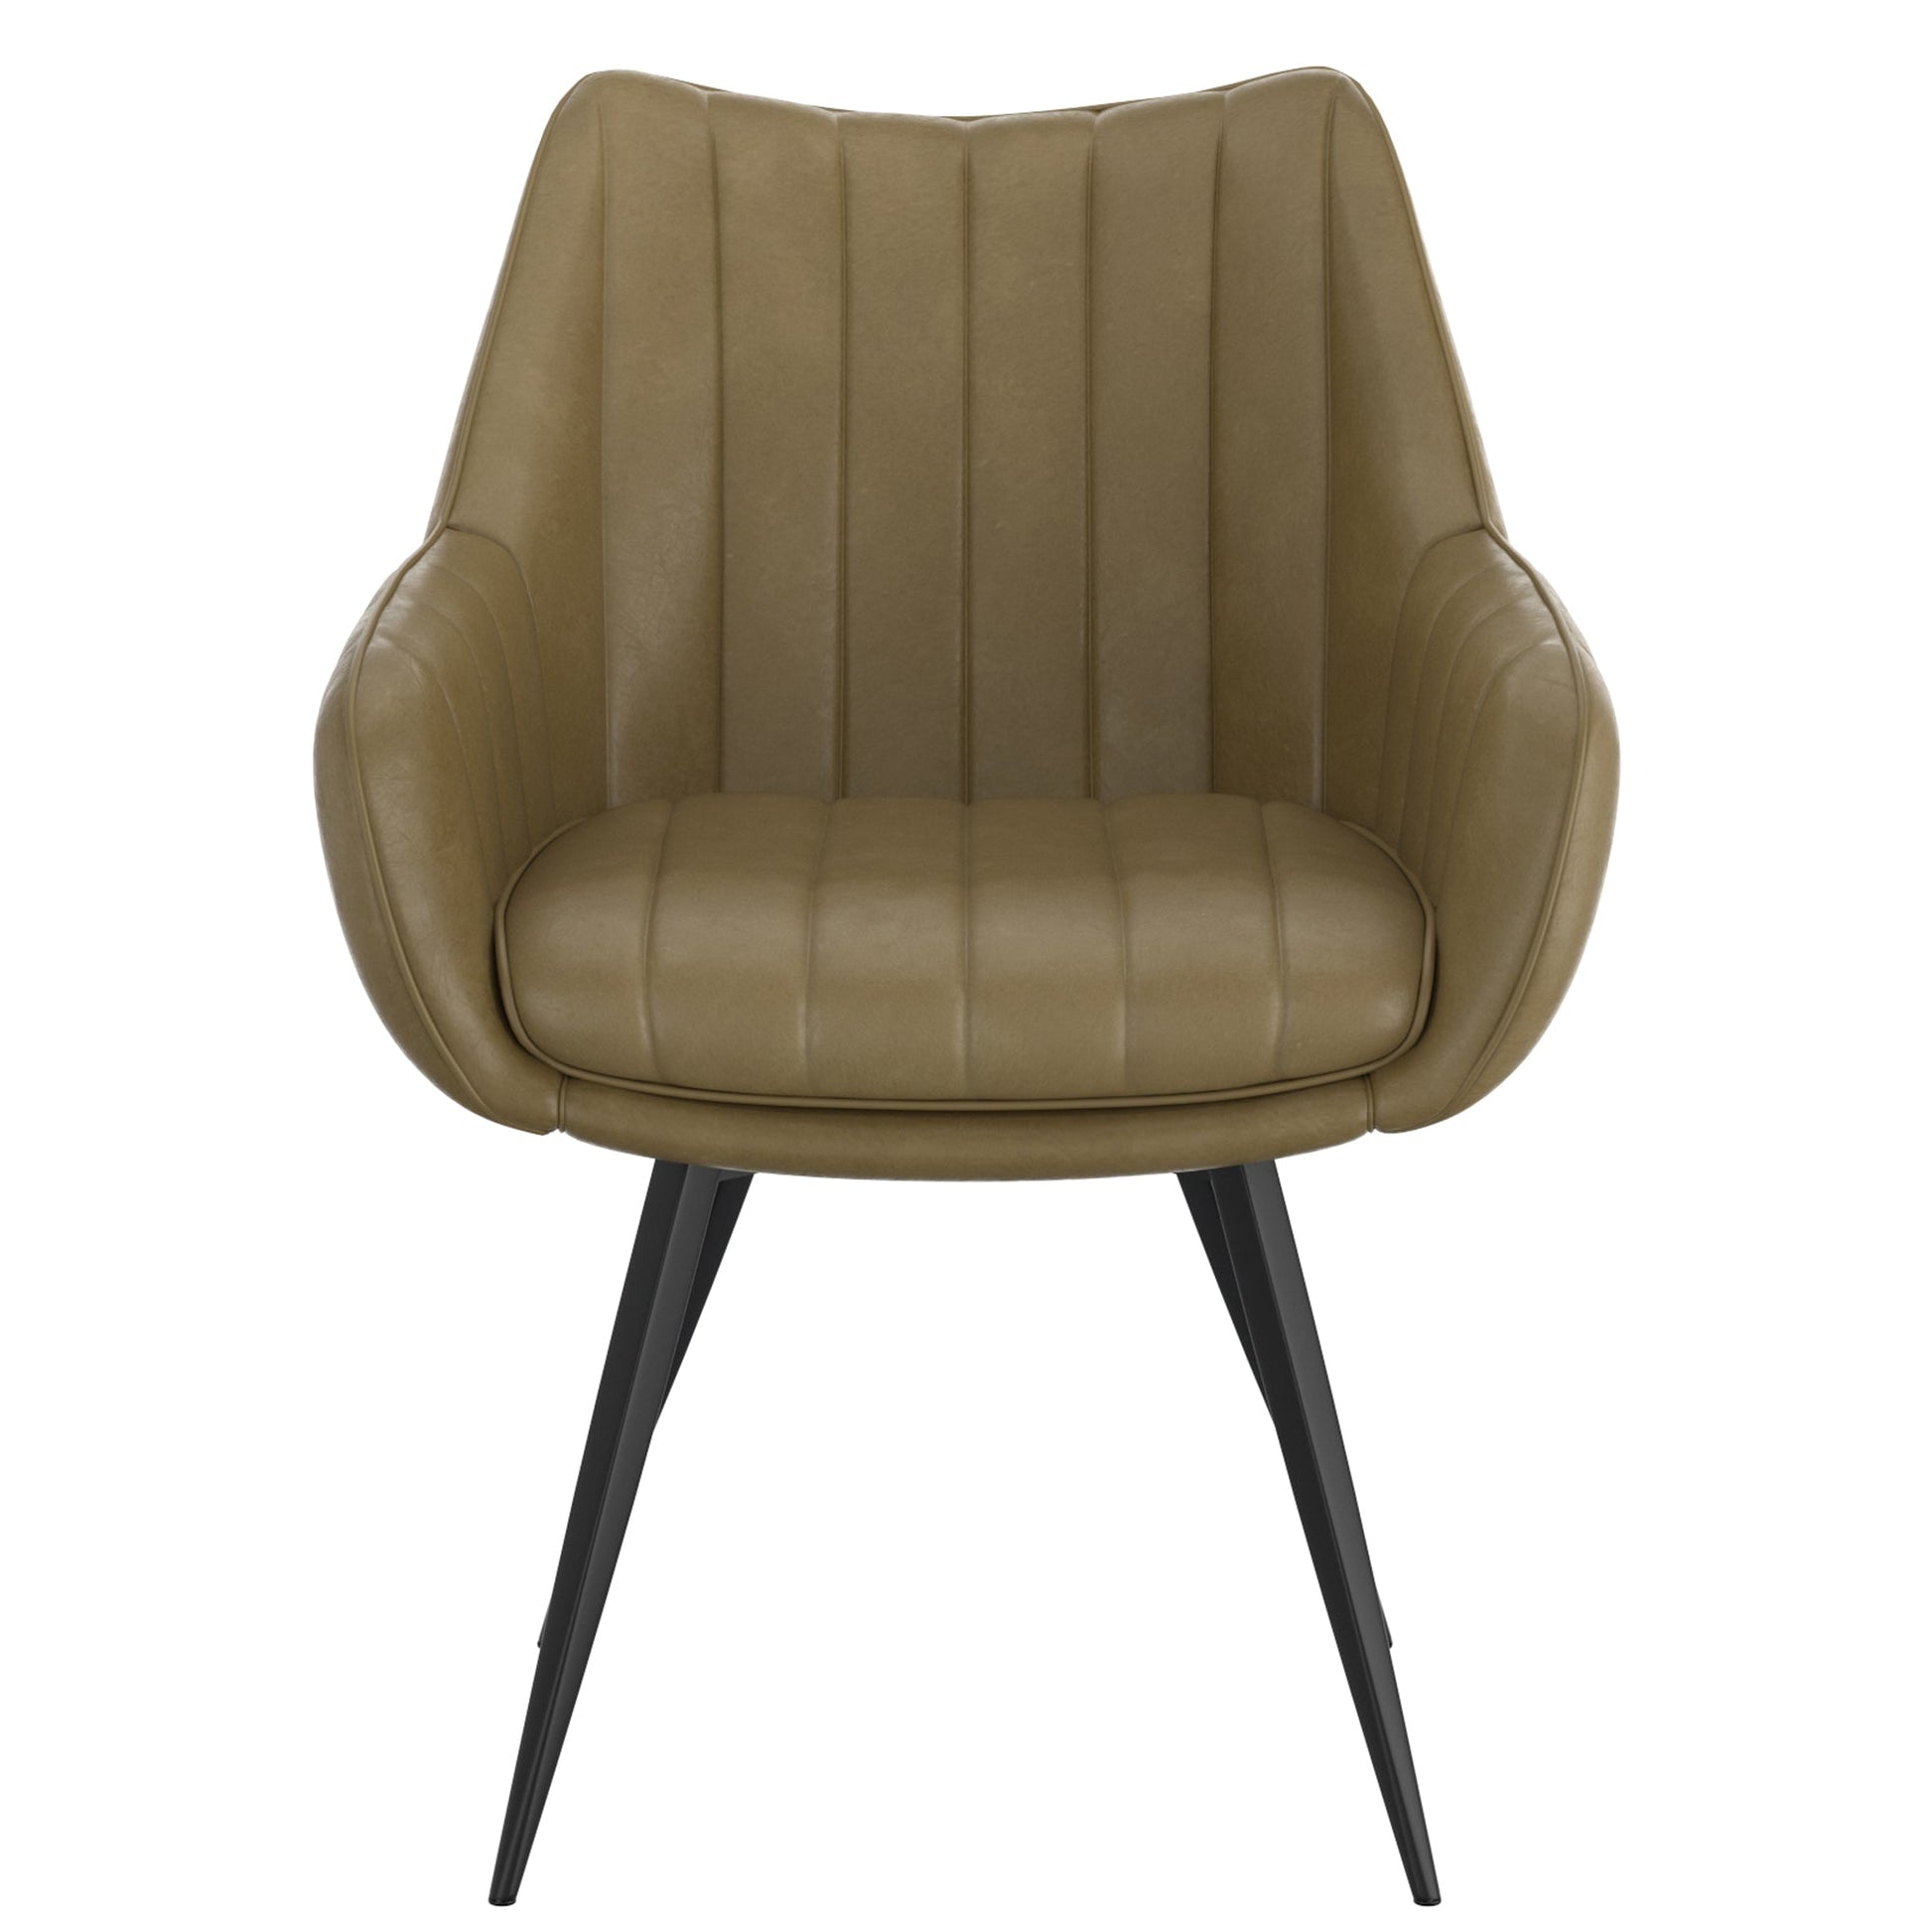 Swivel Dining Chairs | Set of 2 | Talon Green Leather - Your Bar Stools Canada